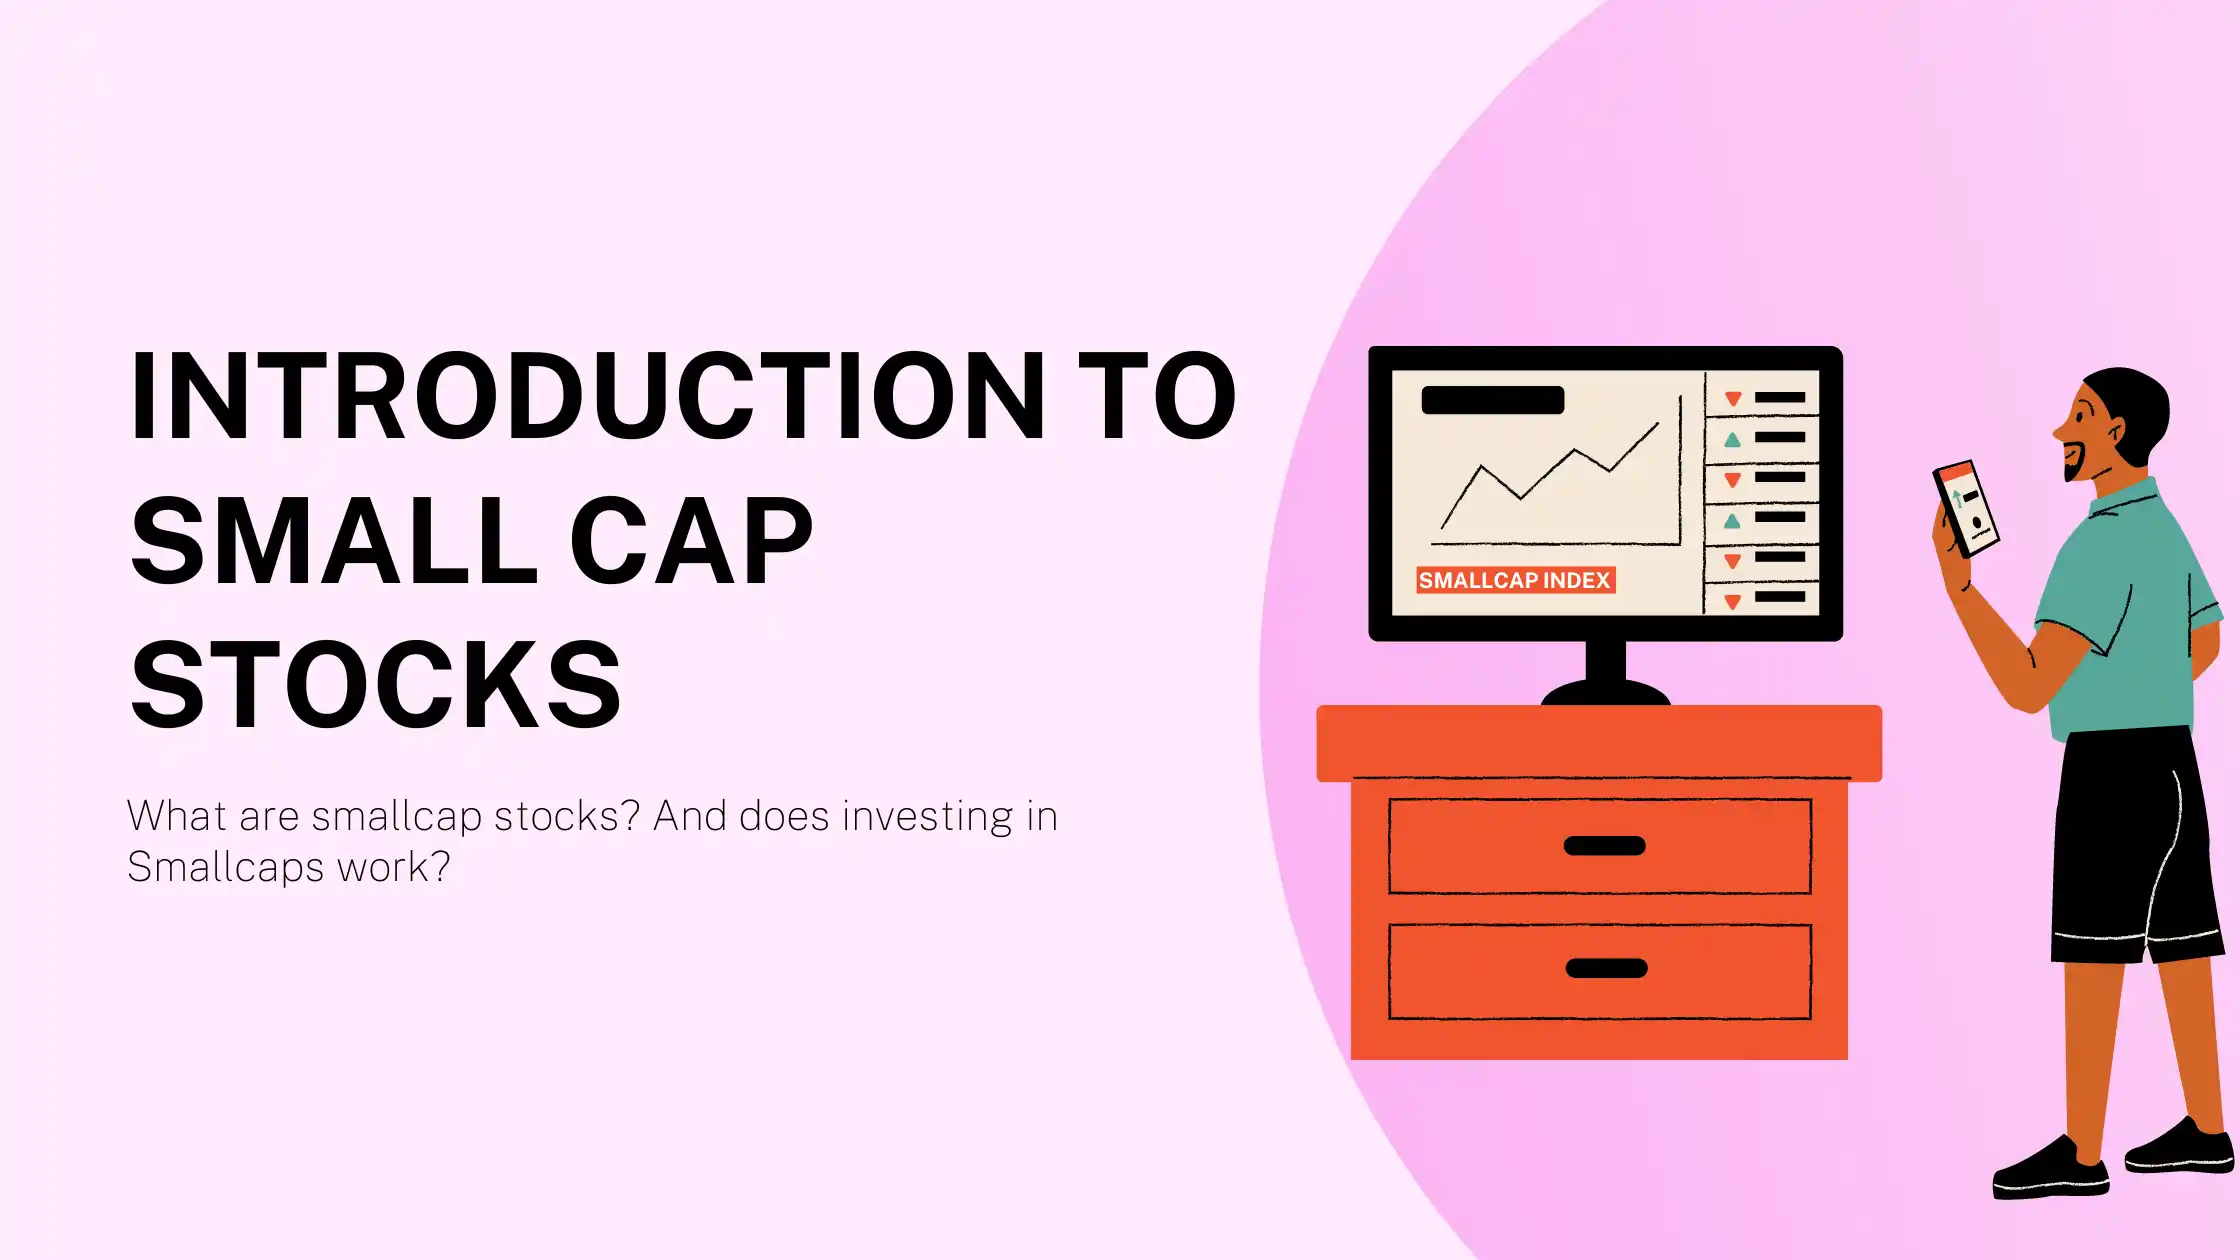 Introduction to Small Cap Stocks